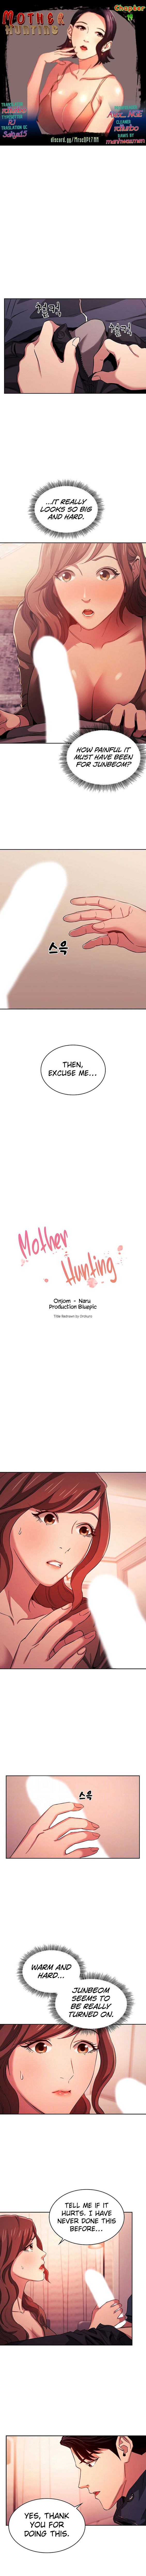 mother-hunting-chap-17-0